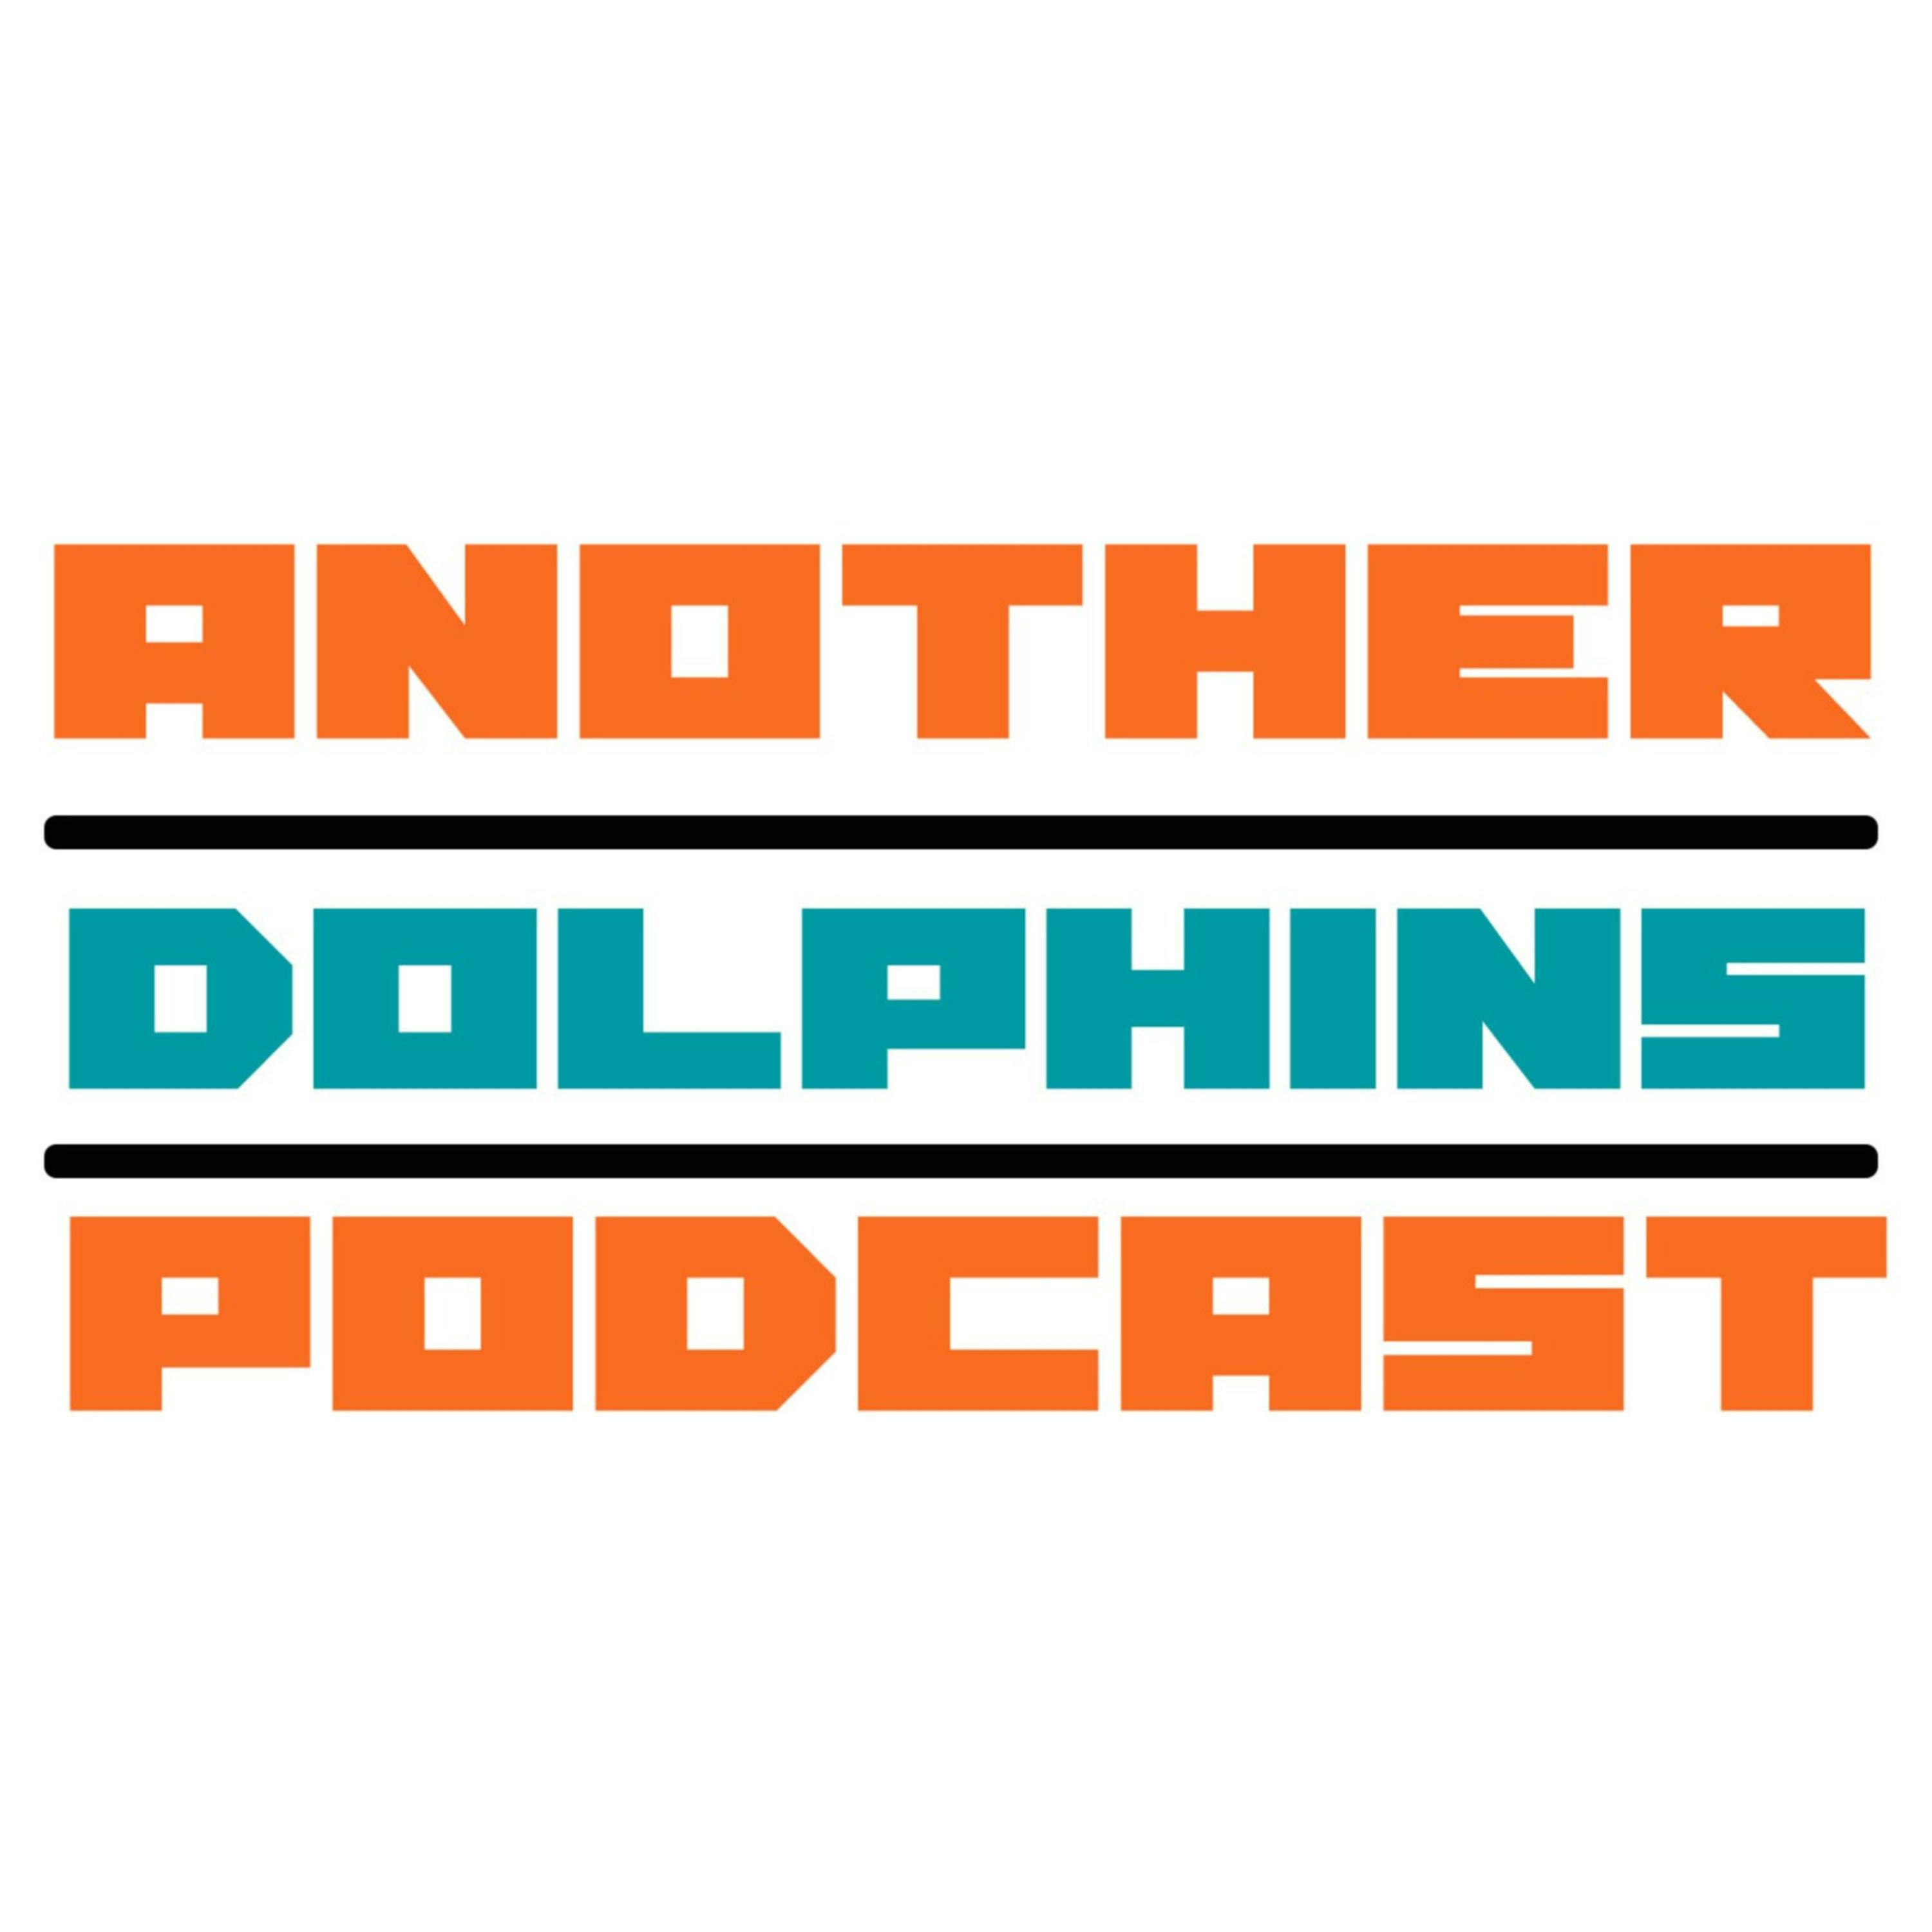 Miami Dolphins (Phinsider Radio) Dolphins begin to sign rookies, remaining free agents that make sense, and the most overrated/underrated players heading into the season